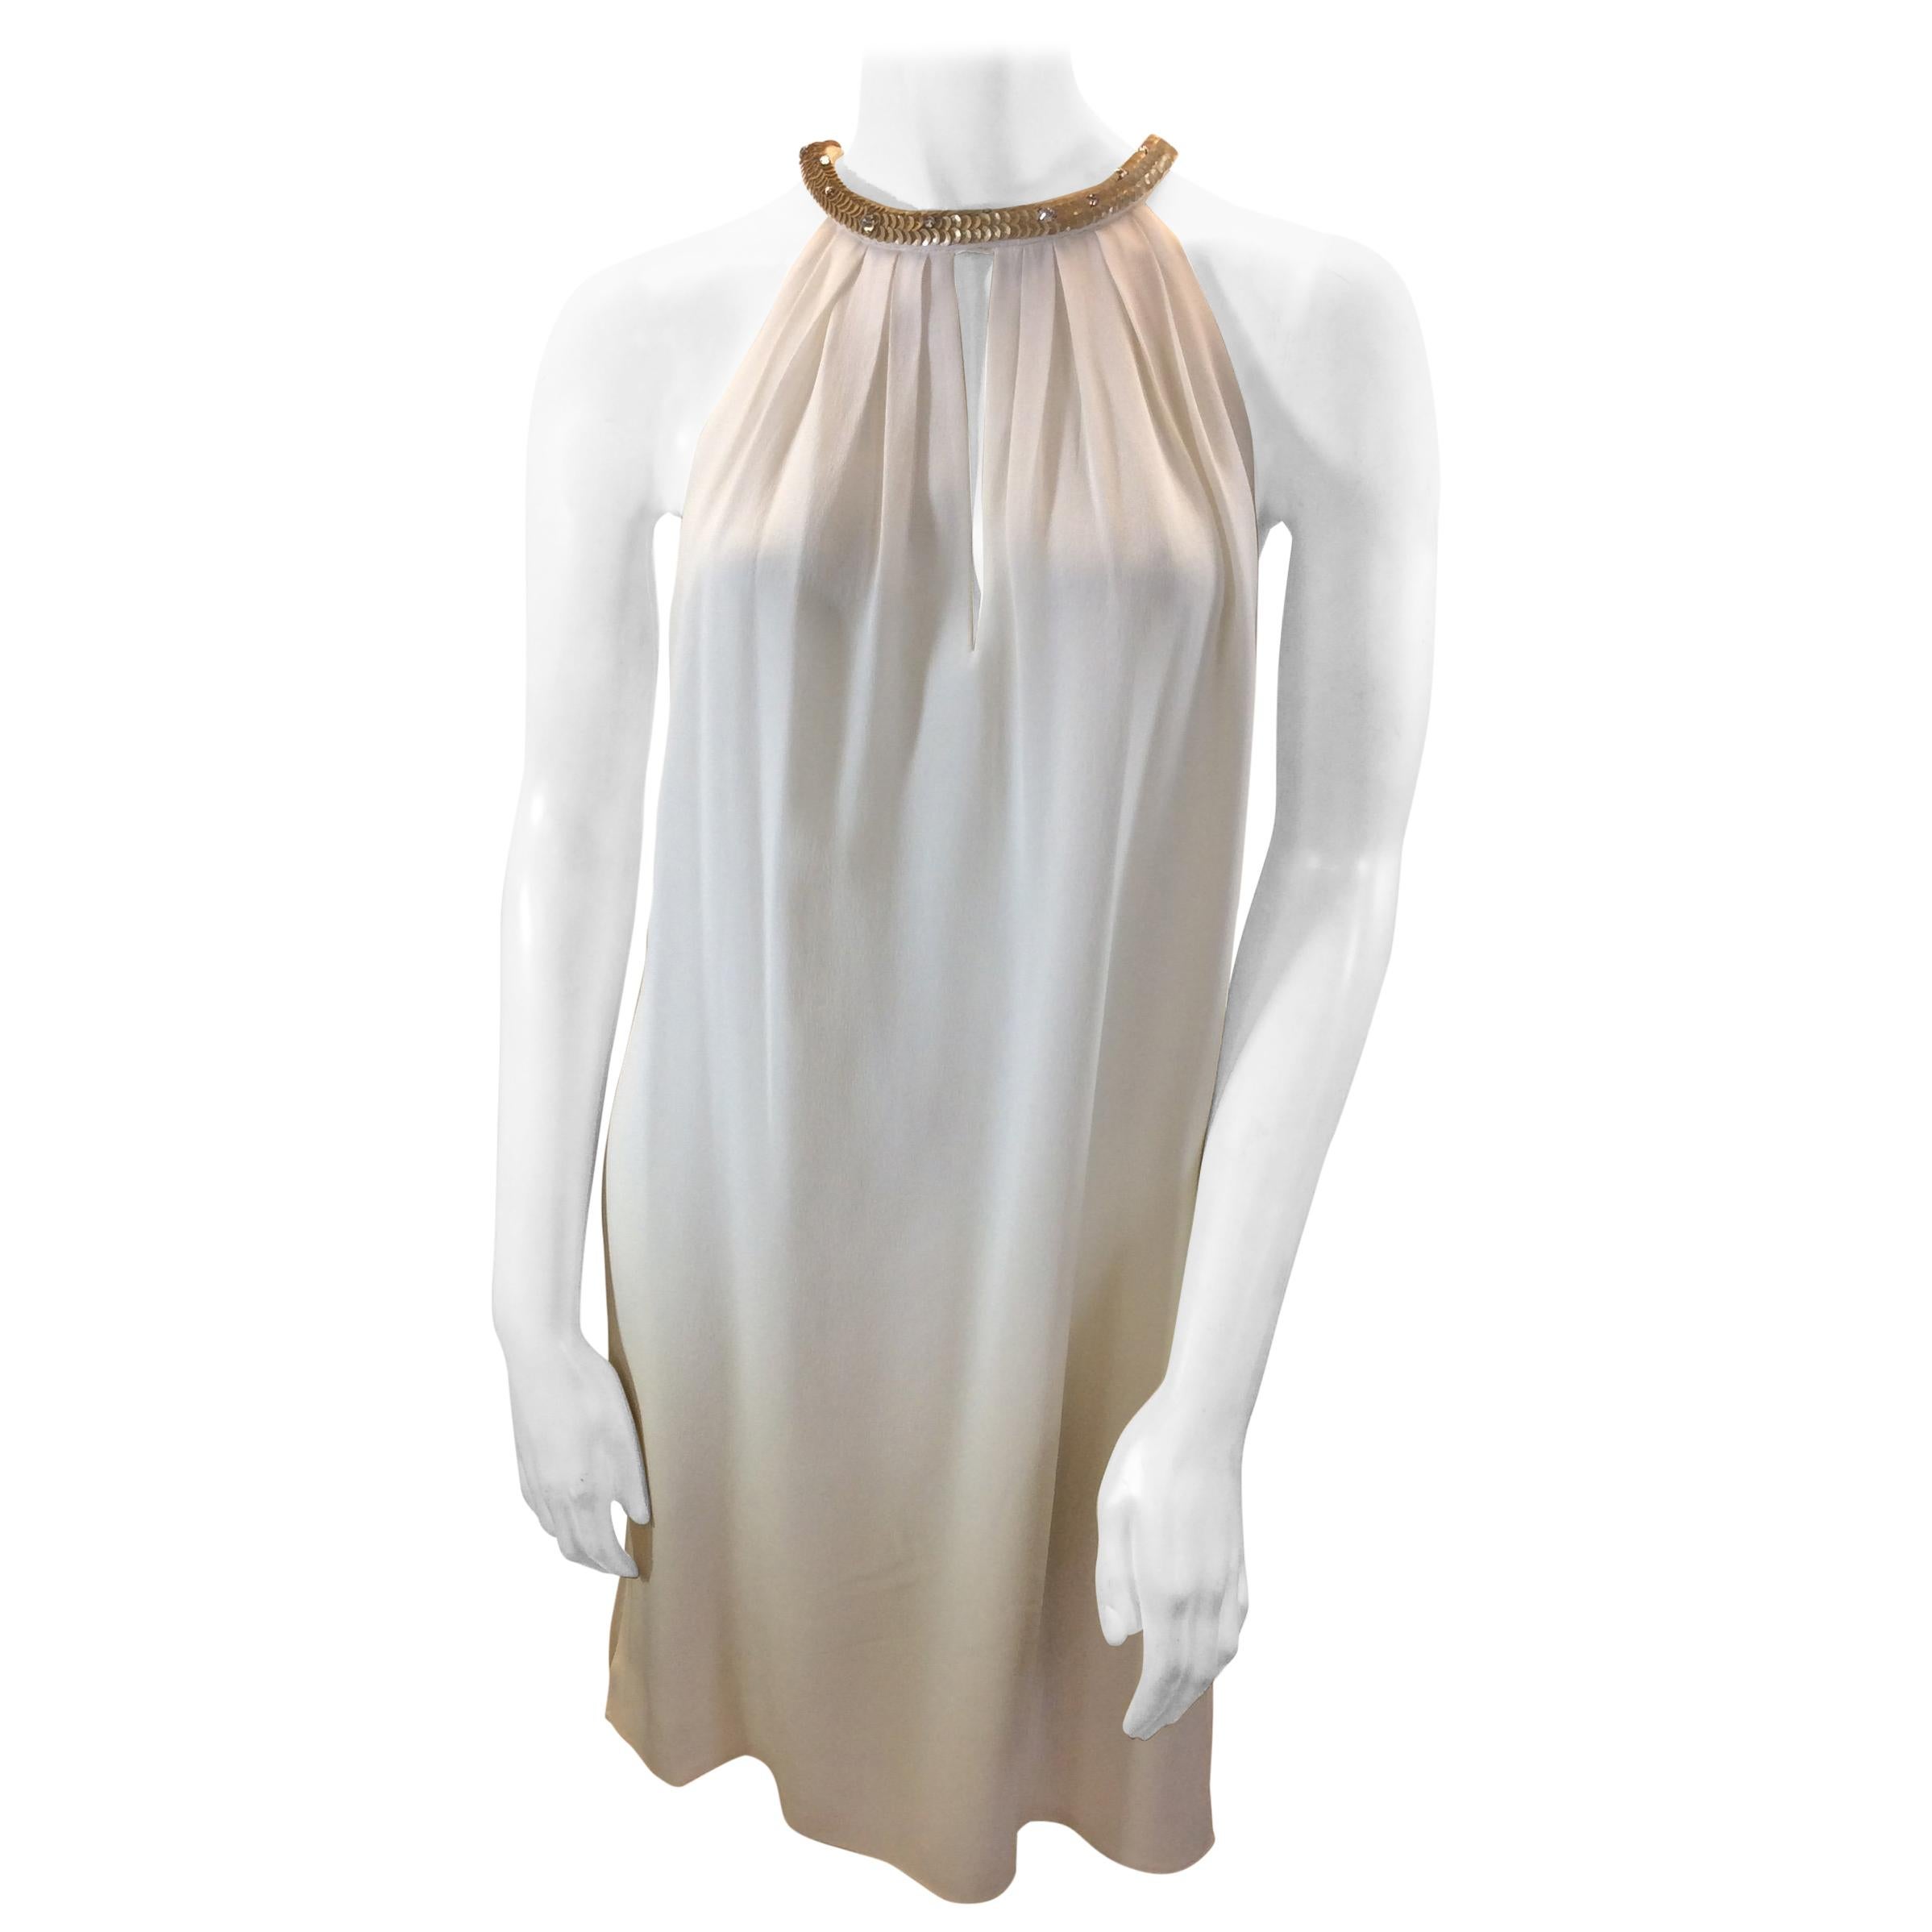 Rebecca Taylor White Dress with Gold Beaded Trim NWT For Sale